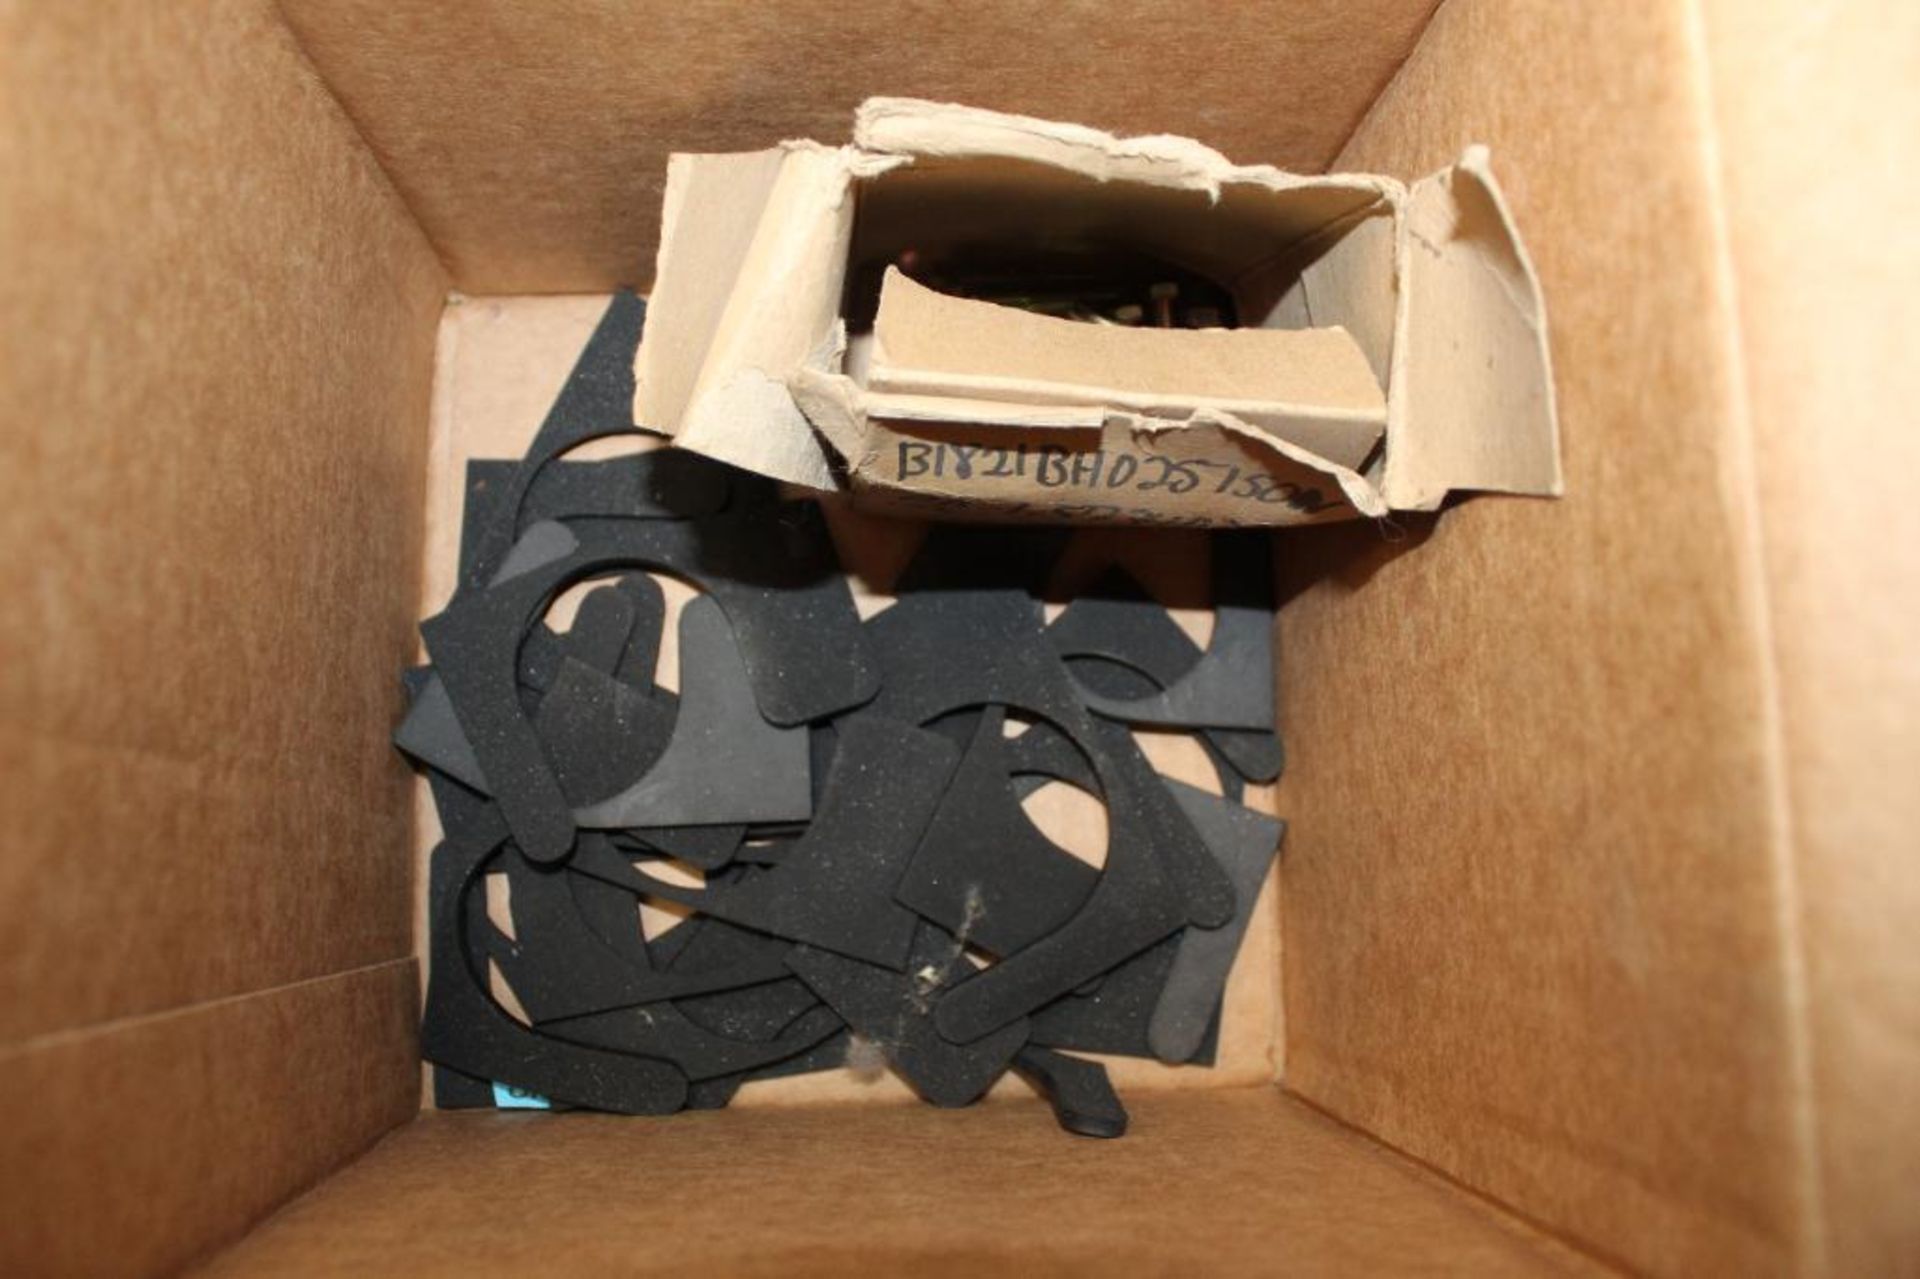 Lot of (9) Boxes and (1) Blue Bin of Assorted Pins, Bolts, Washers and Nuts - Image 7 of 13